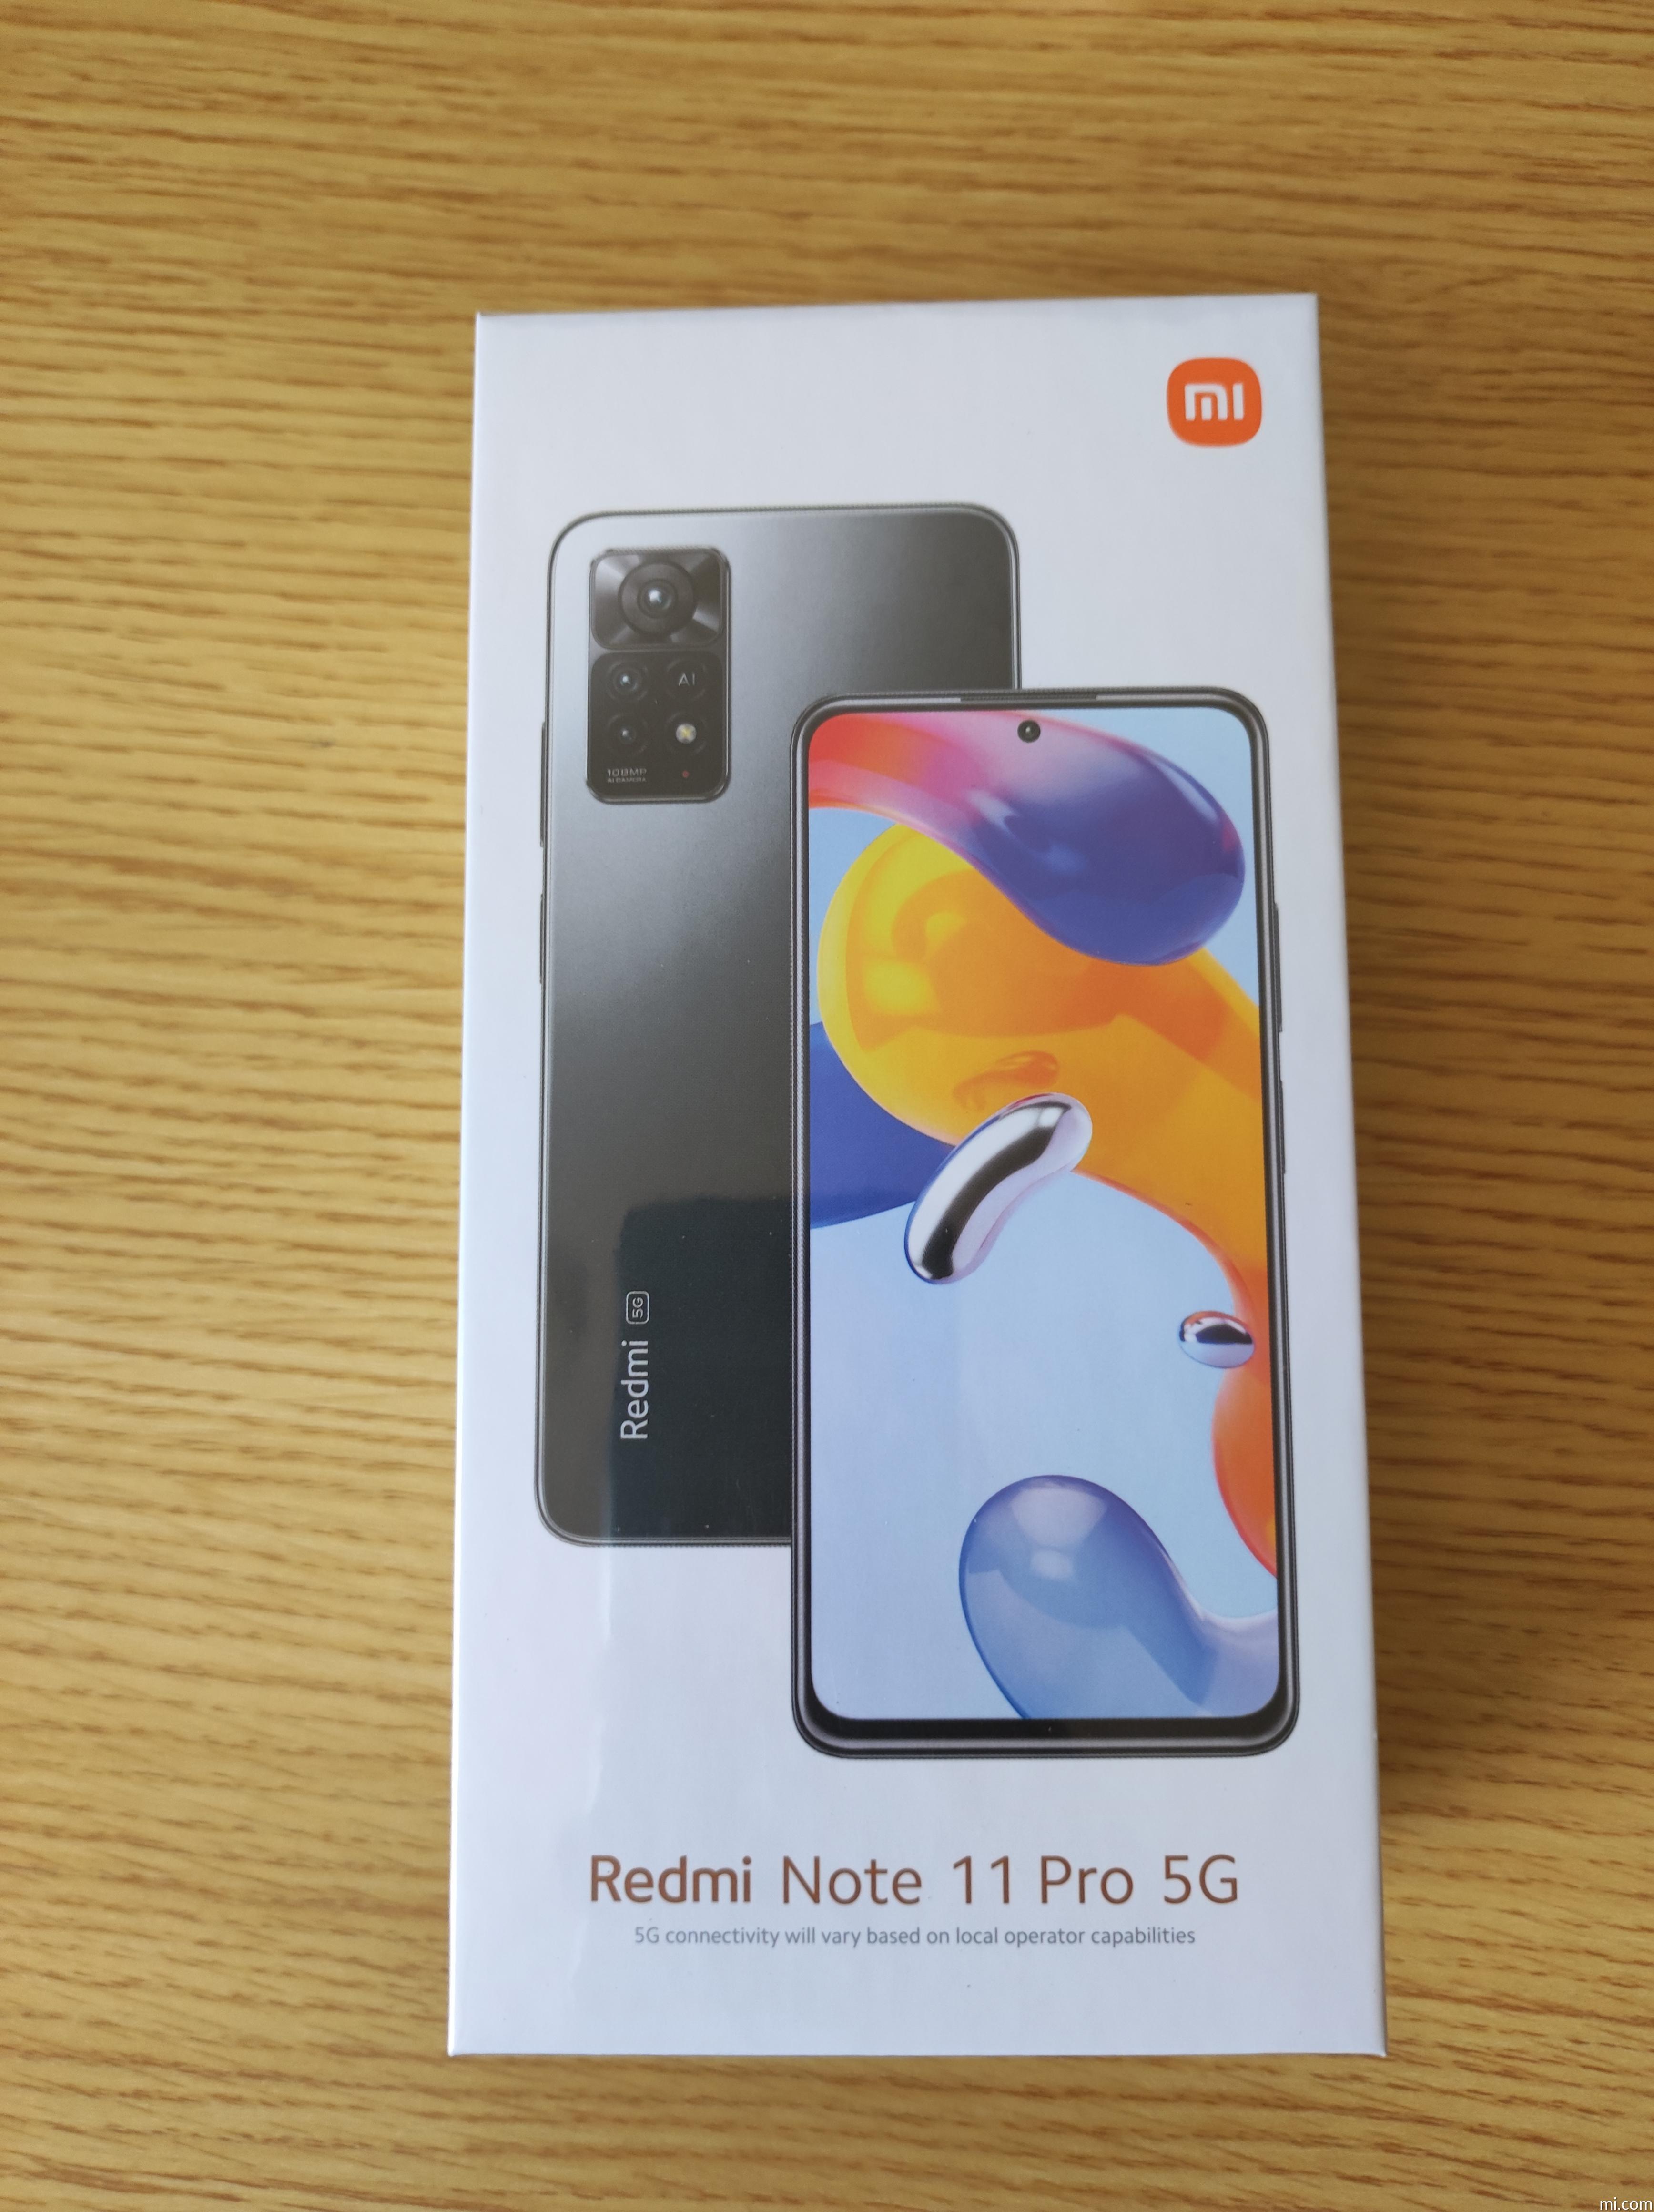 Xiaomi Redmi Note 11 Pro 5G Global - Specifications